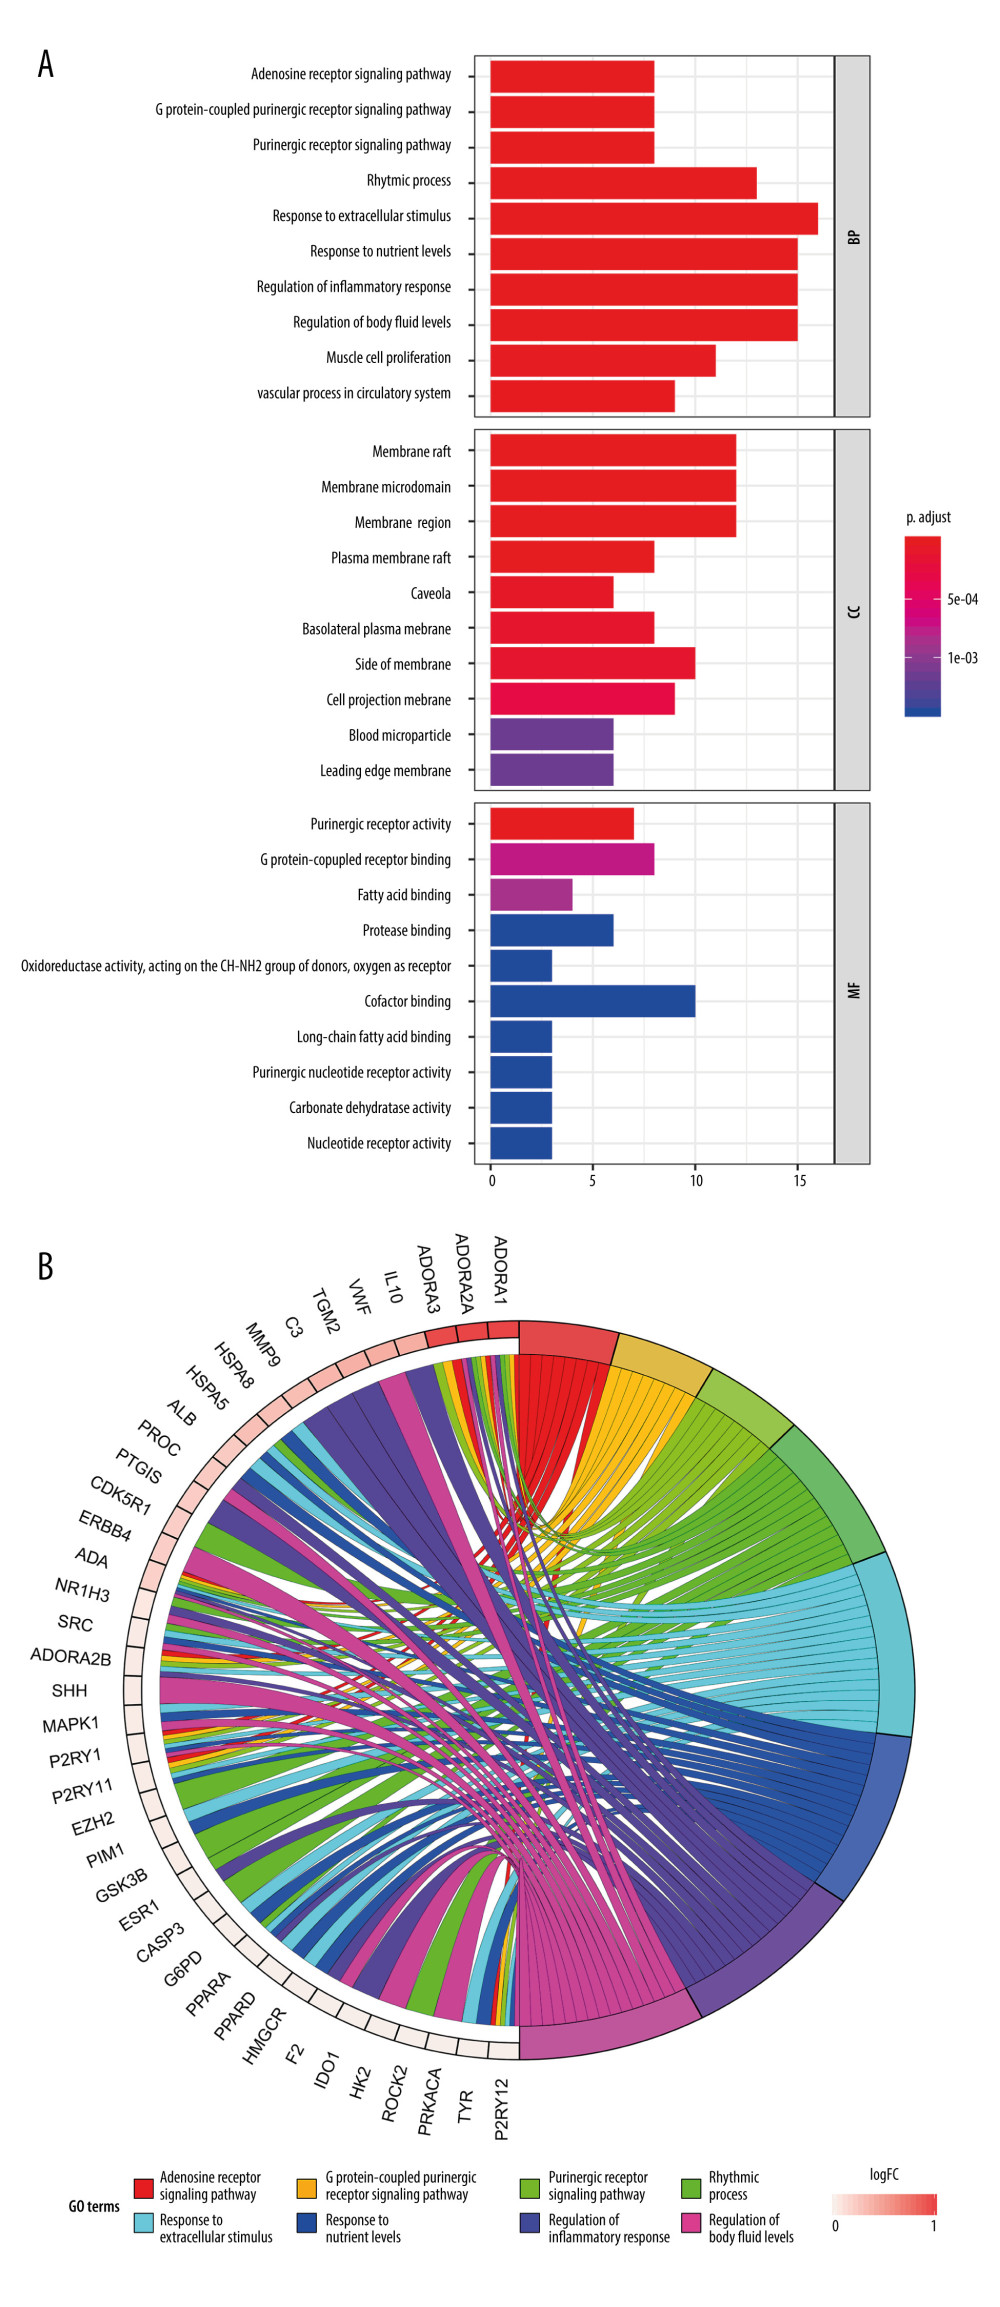 Gene Ontology (GO) analysis and significantly enriched GO terms of target genes related to Cordyceps cicadae in renal IR. Figures created by R 3.6.0 with Rstudio, R: The R Project for Statistical Computing (r-project.org). (A) The top 30 GO terms in biological processes (BP), molecular function (MF) and cell component (CC). The x-axis represents significant enrichment counts of these terms, and the y-axis represents the categories of GO terms of the target genes (P value ≤0.01). (B) The first 8 significantly enriched GO terms in a circle-plot style. FC - Fold Change.